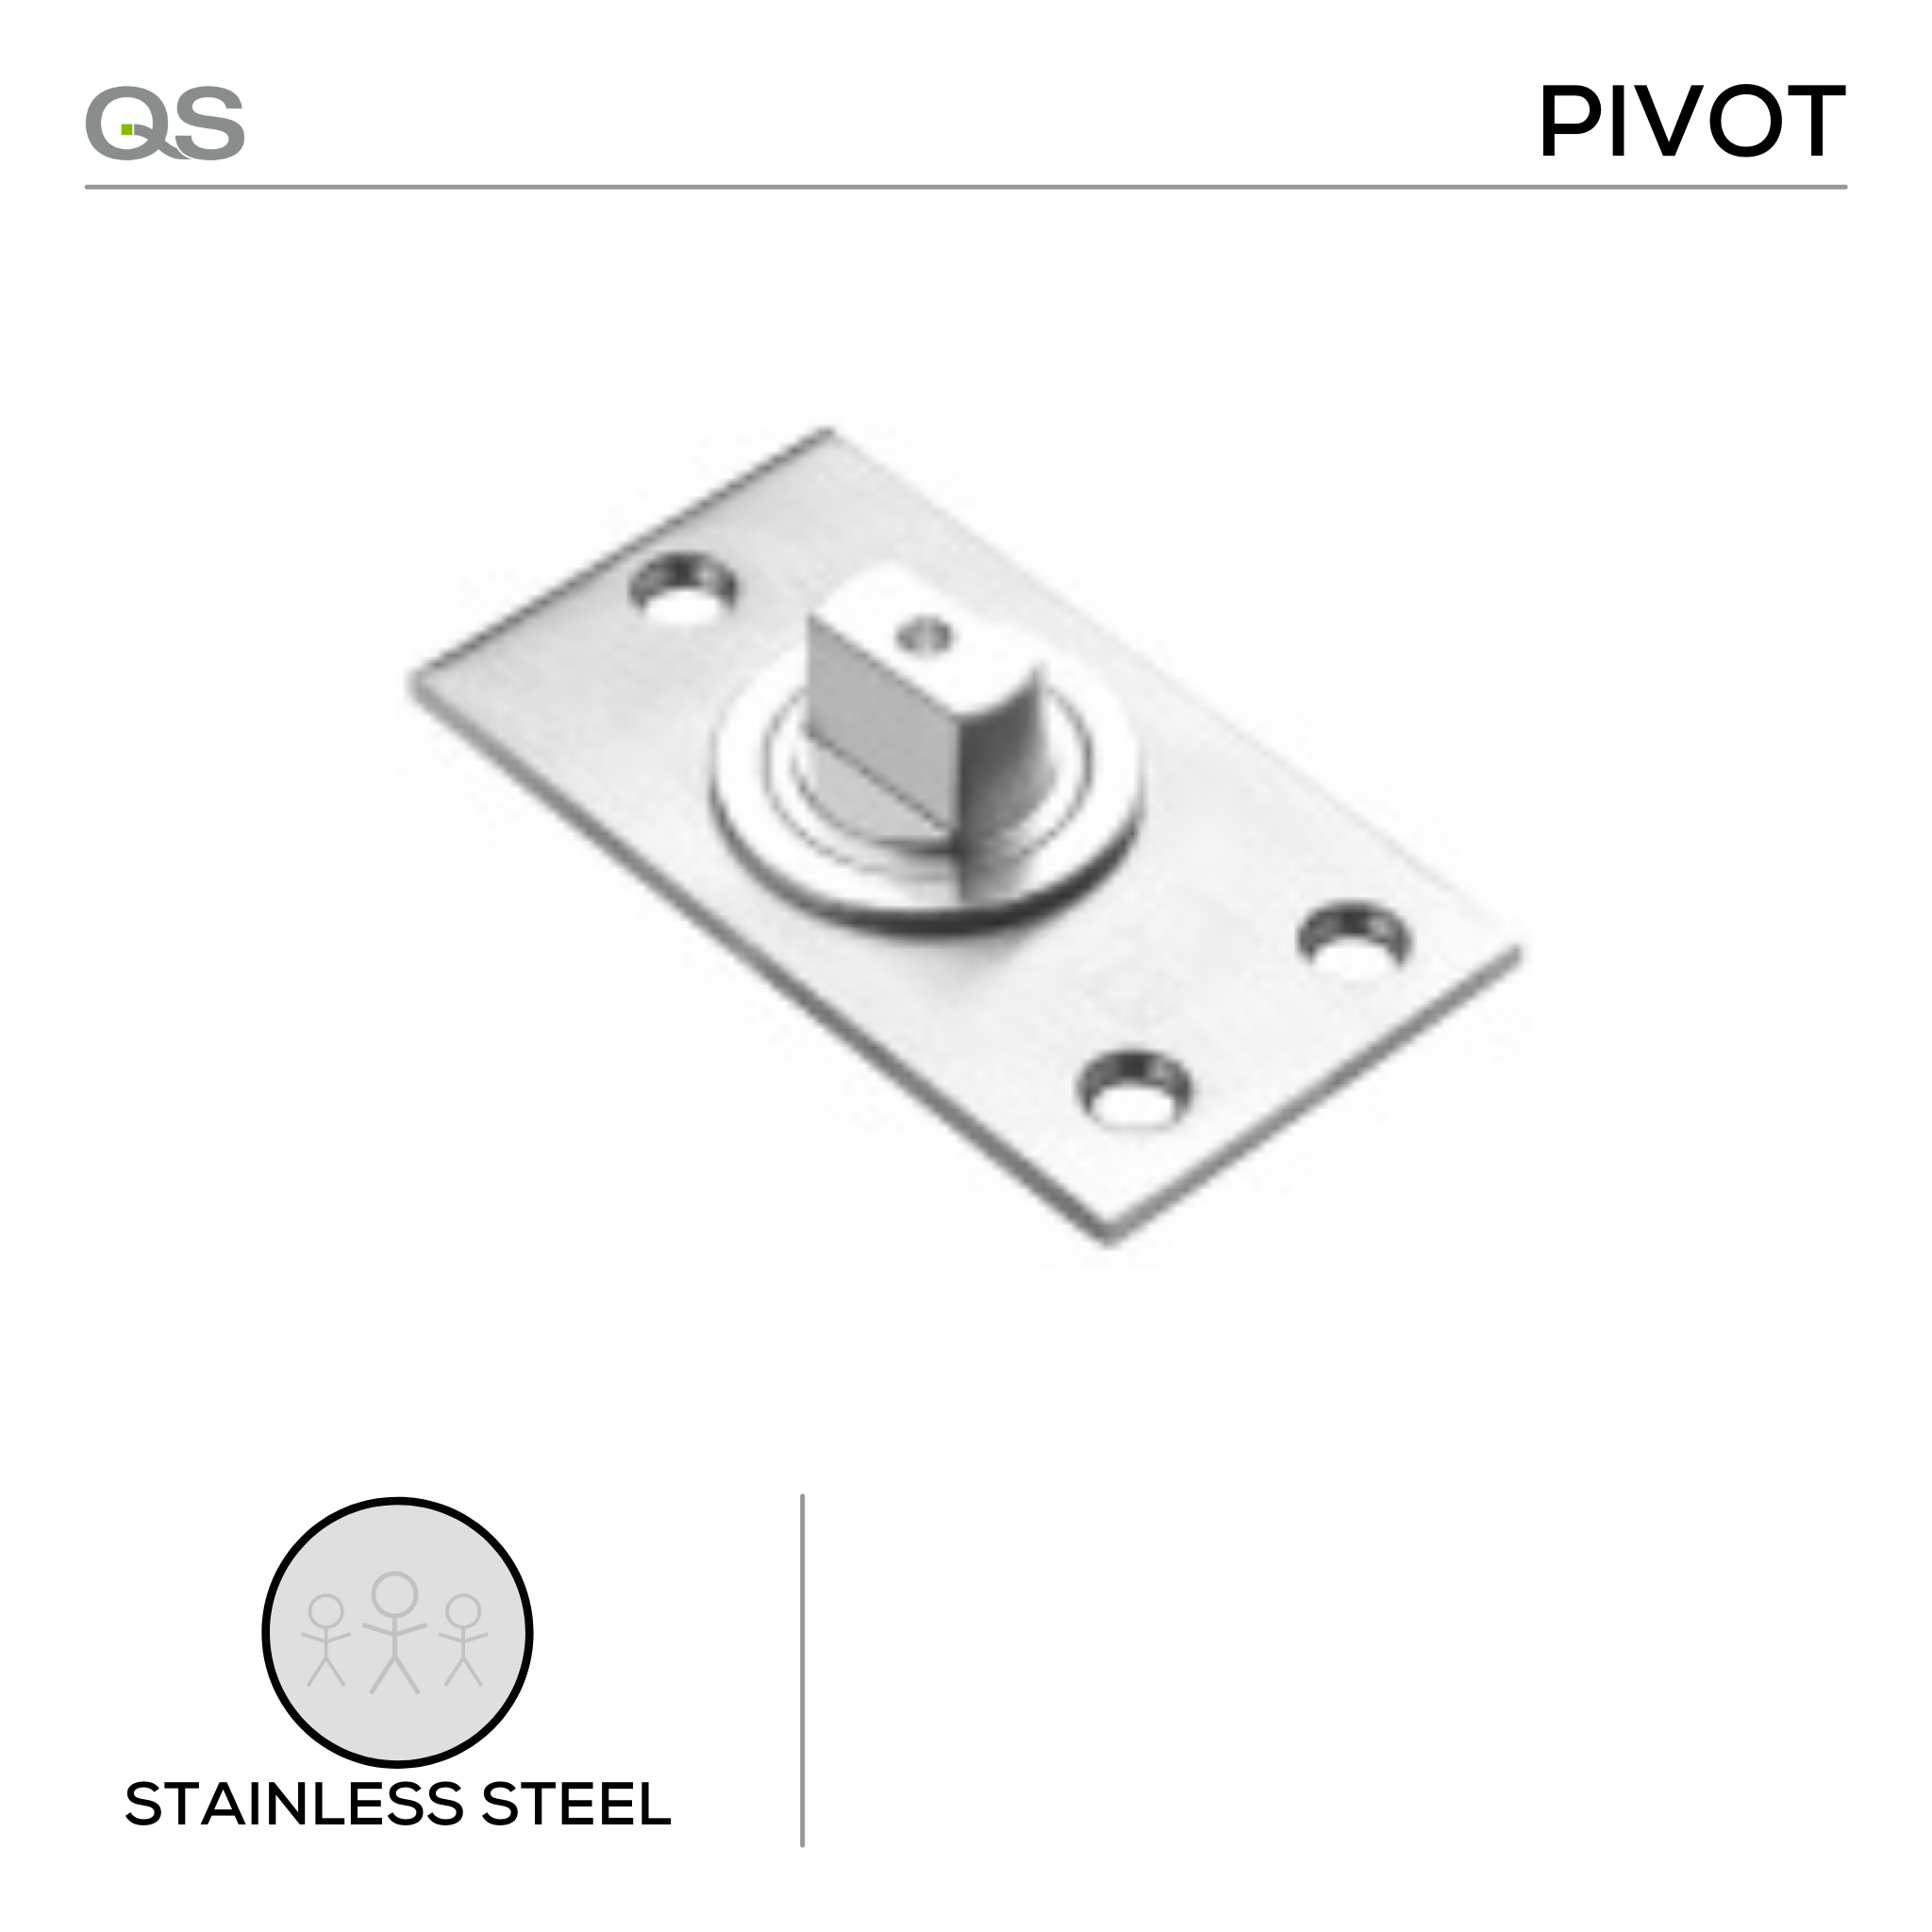 QS5501 Pivot For Doors up to 250kg, QS